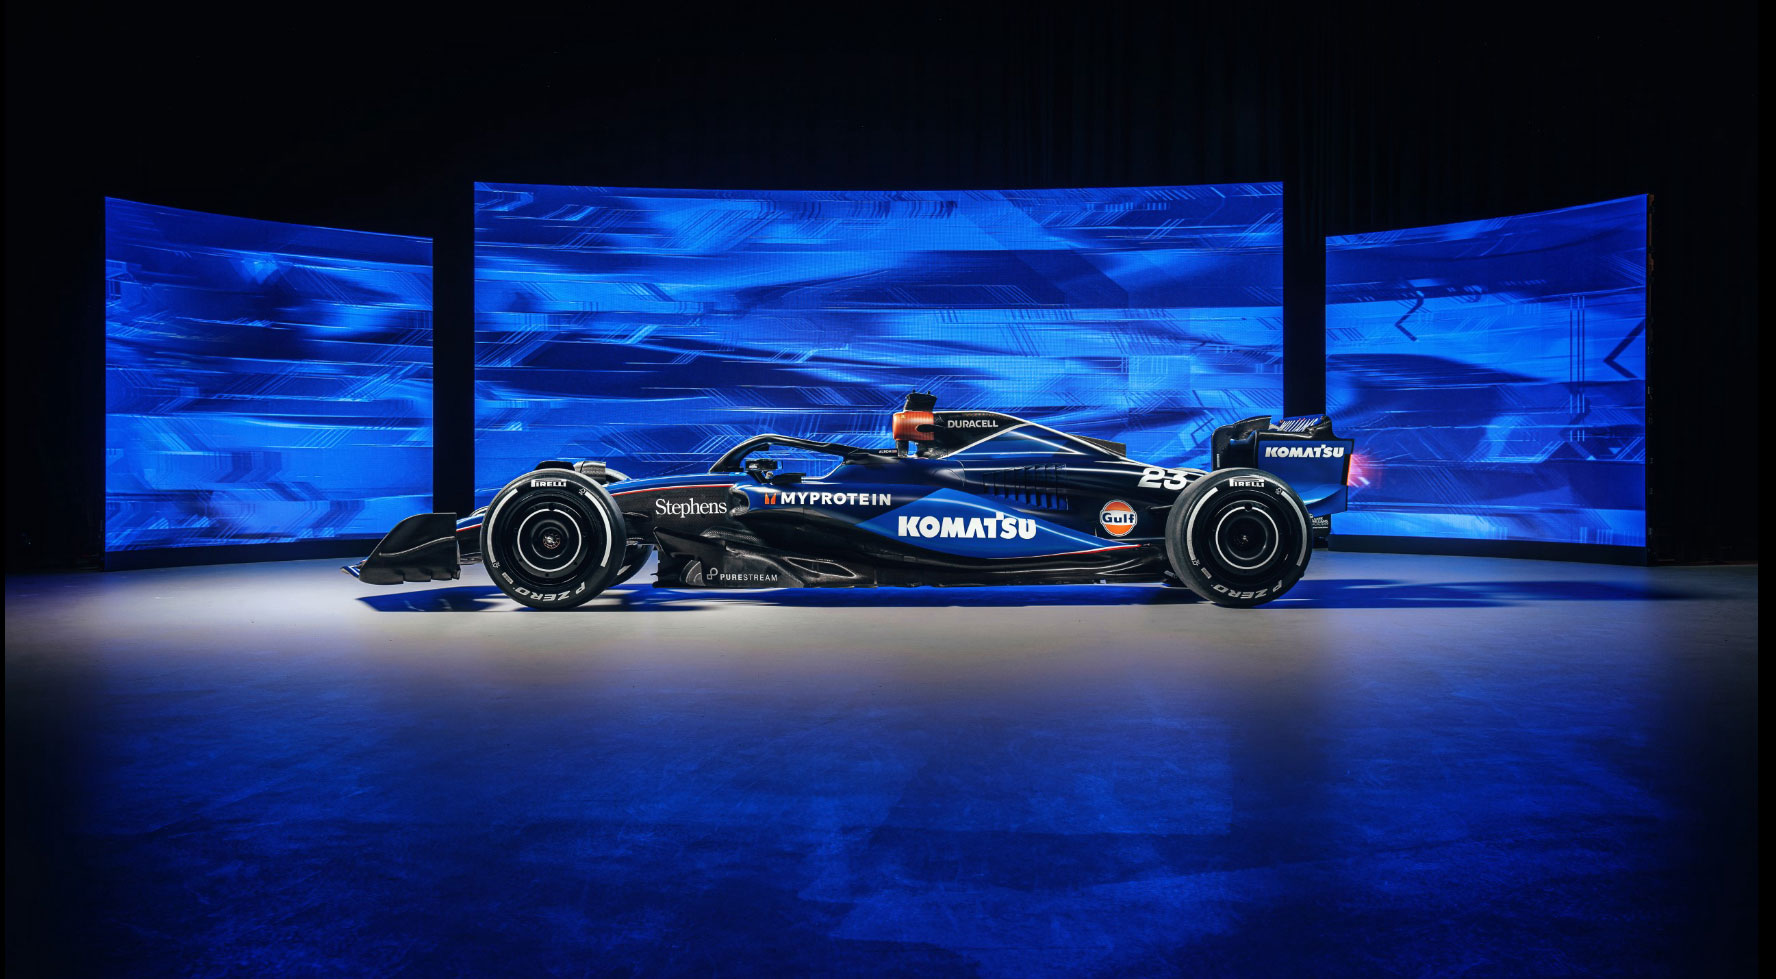 Komatsu’s logo and branding feature prominently on the 2024 Williams Racing livery, as well as the team’s overalls and kit, for the upcoming Formula One season.